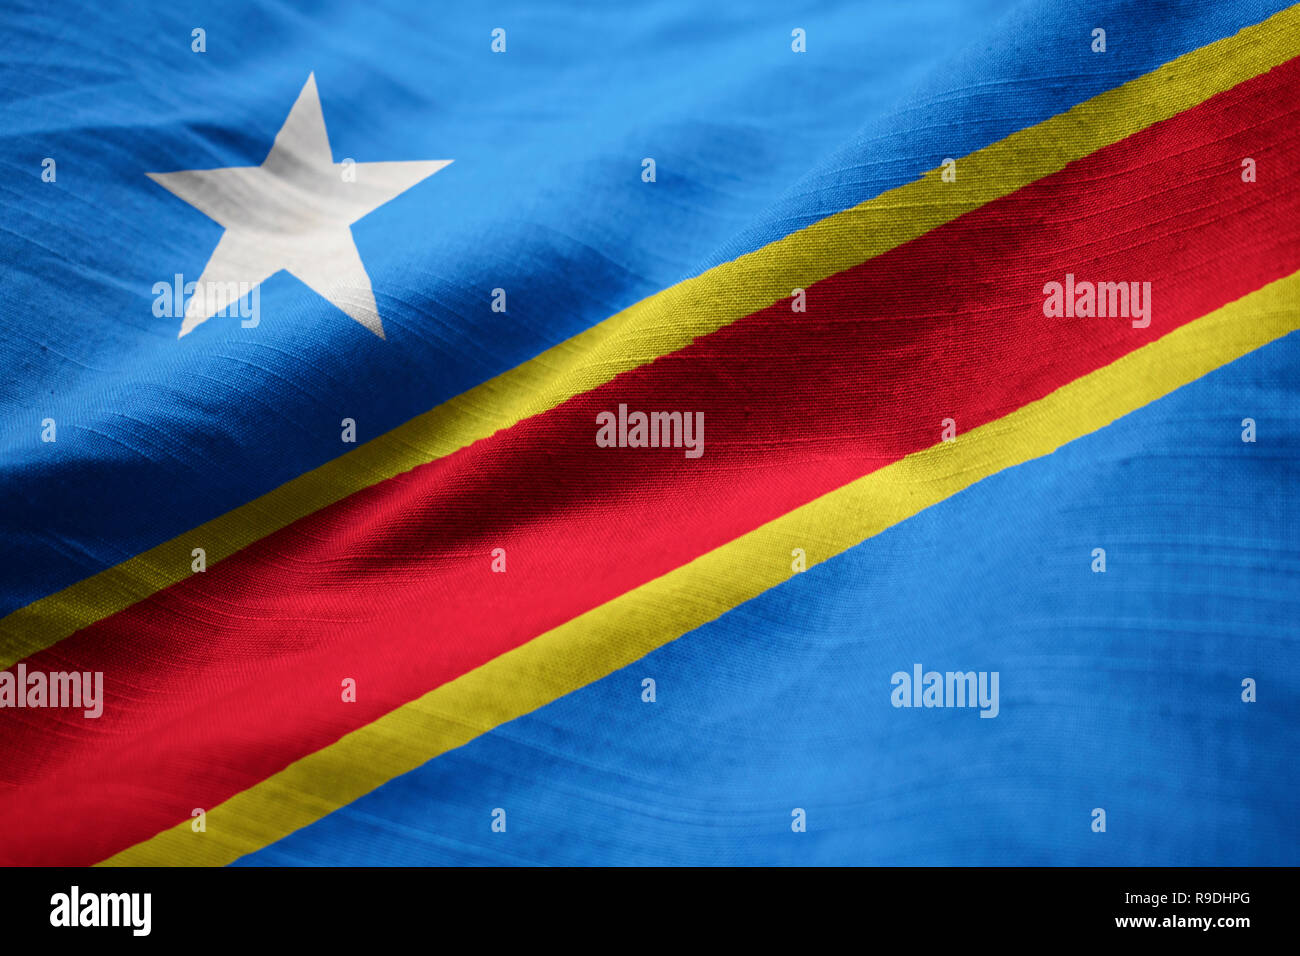 Closeup of the Ruffled Democratic Republic of the Congo Flag, the Democratic Republic of the Congo Flag Blowing in Wind Stock Photo